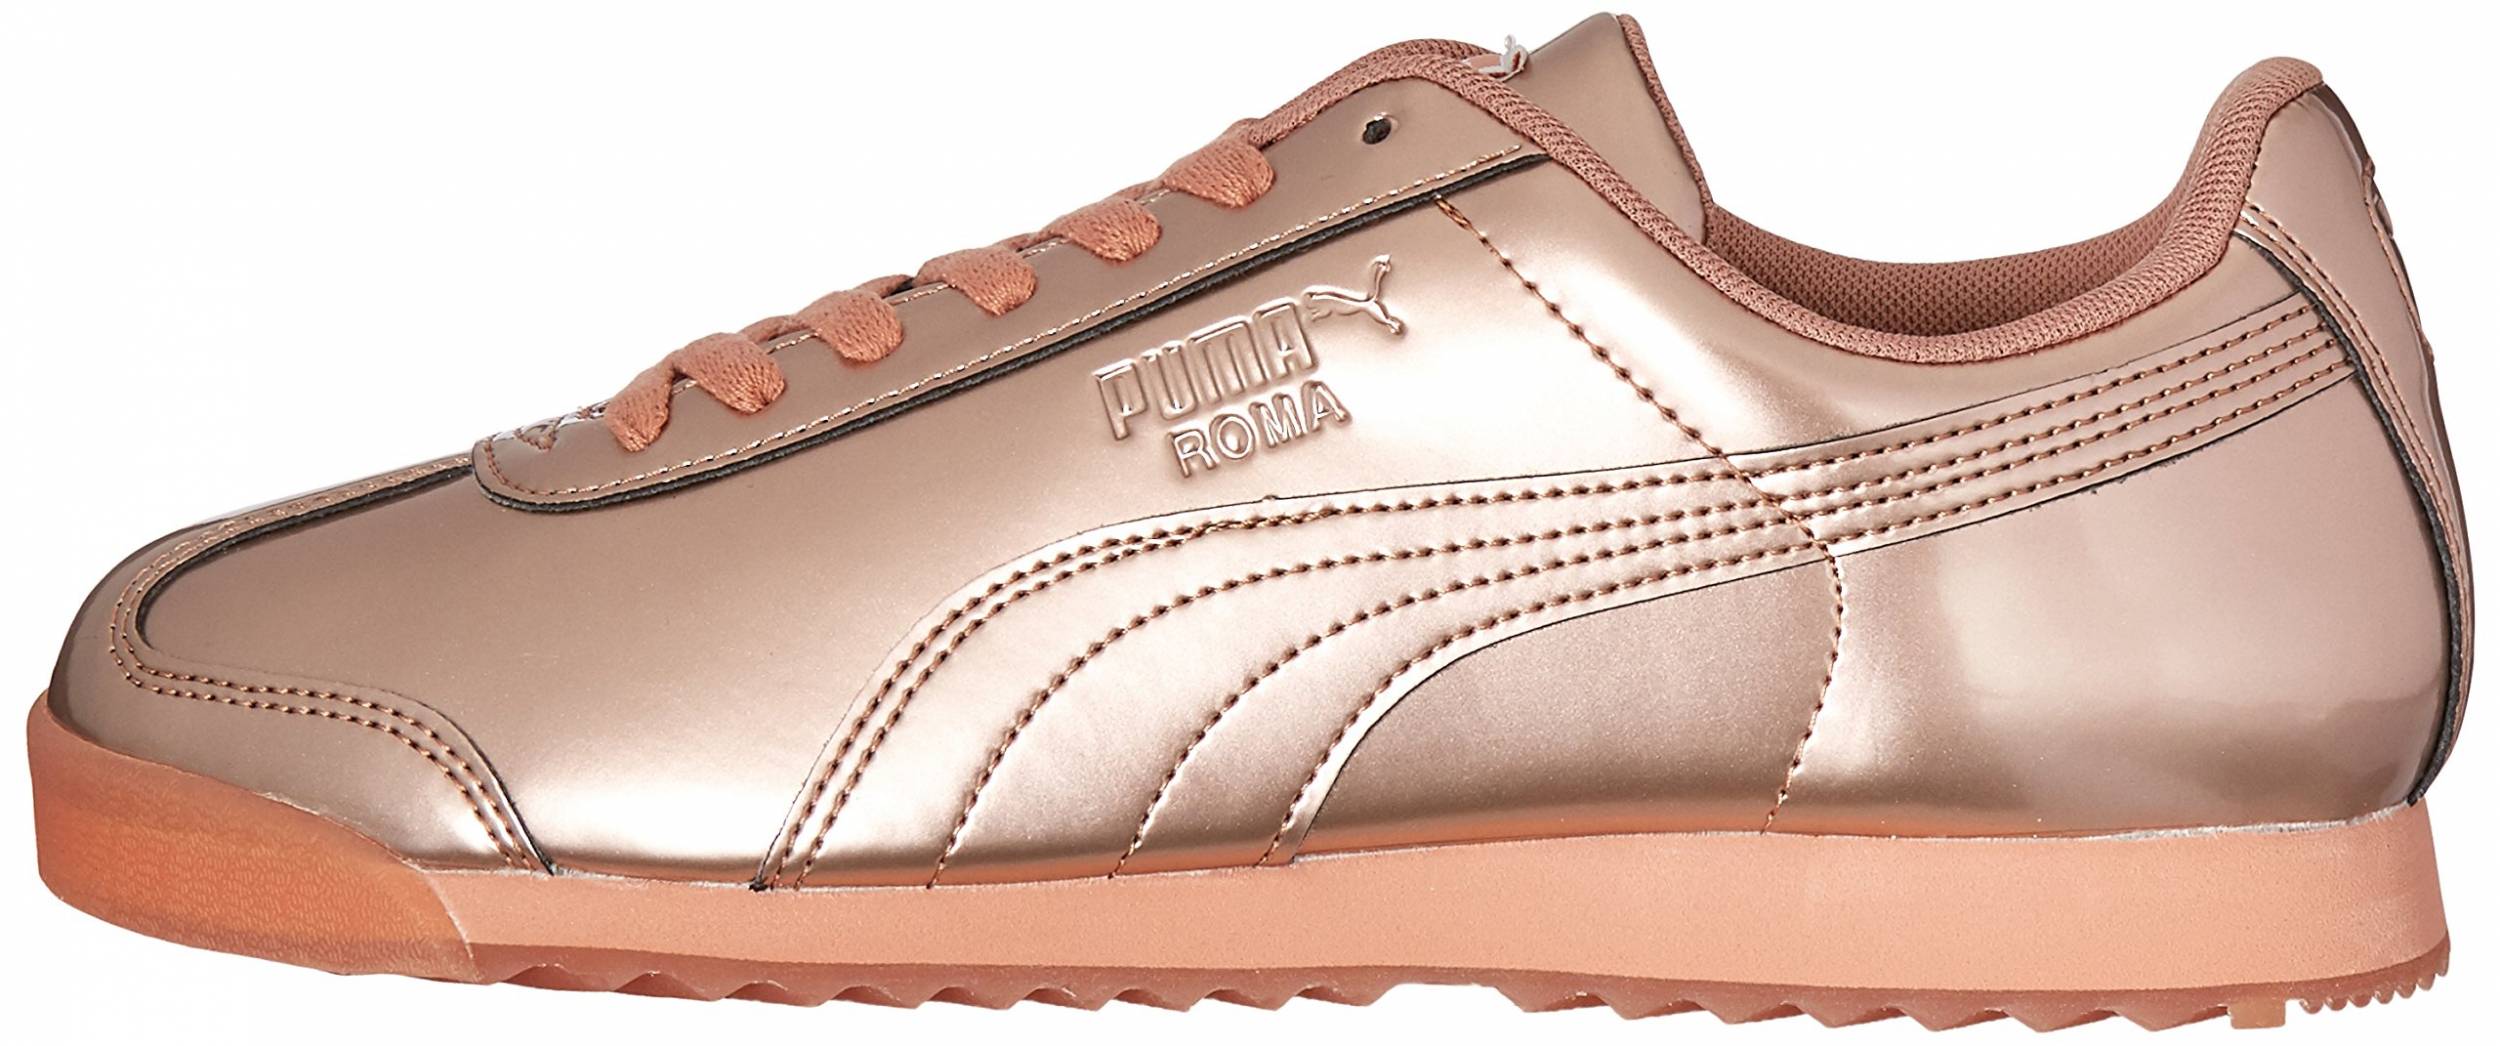 Only $46 + Review of Puma Roma Ano 